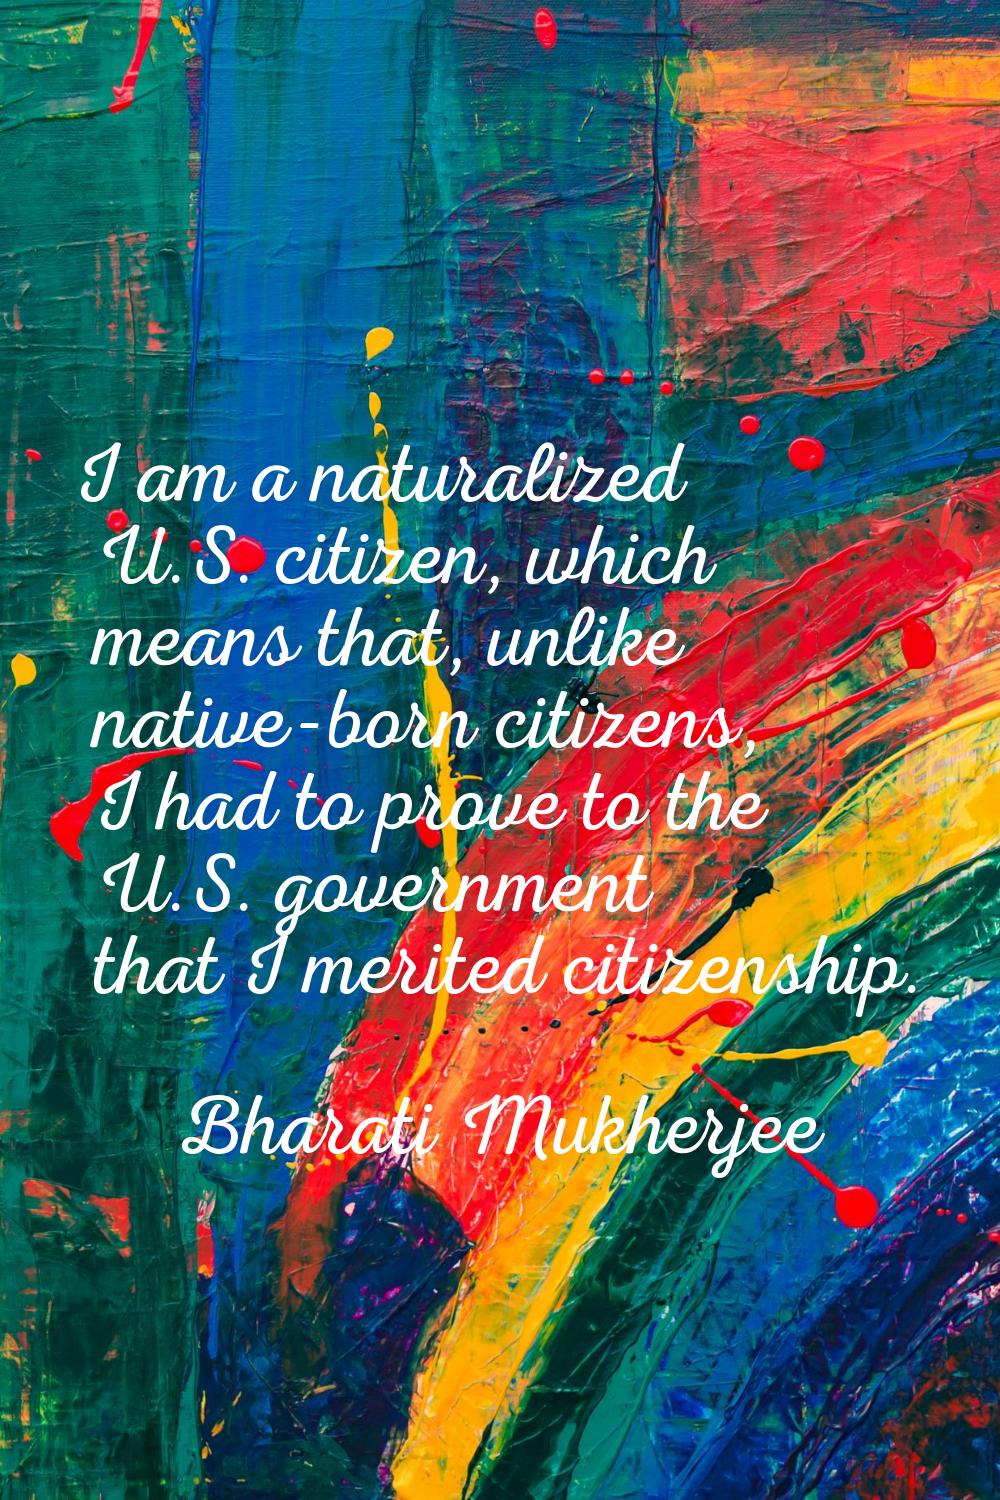 I am a naturalized U.S. citizen, which means that, unlike native-born citizens, I had to prove to t